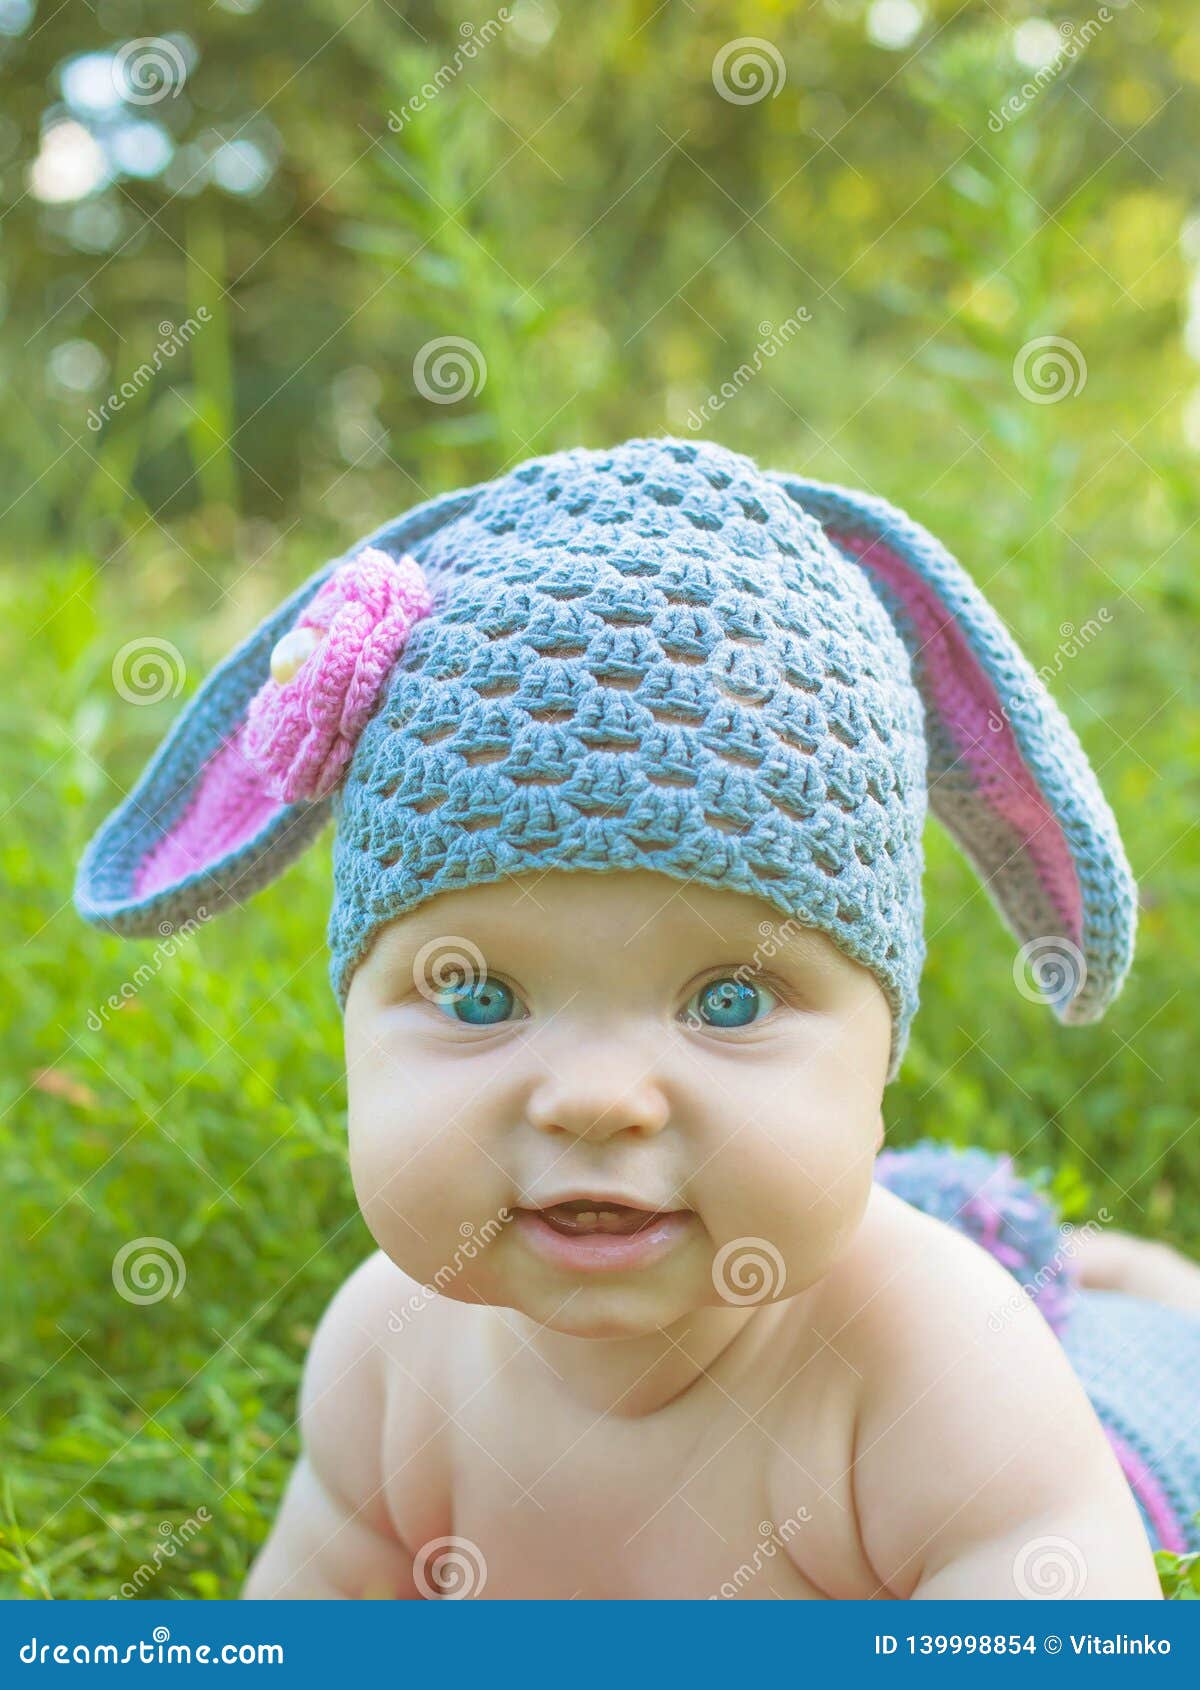 New Lovely baby girls butterfly Newborn Knit Crochet Clothes Photo Prop hat 007 